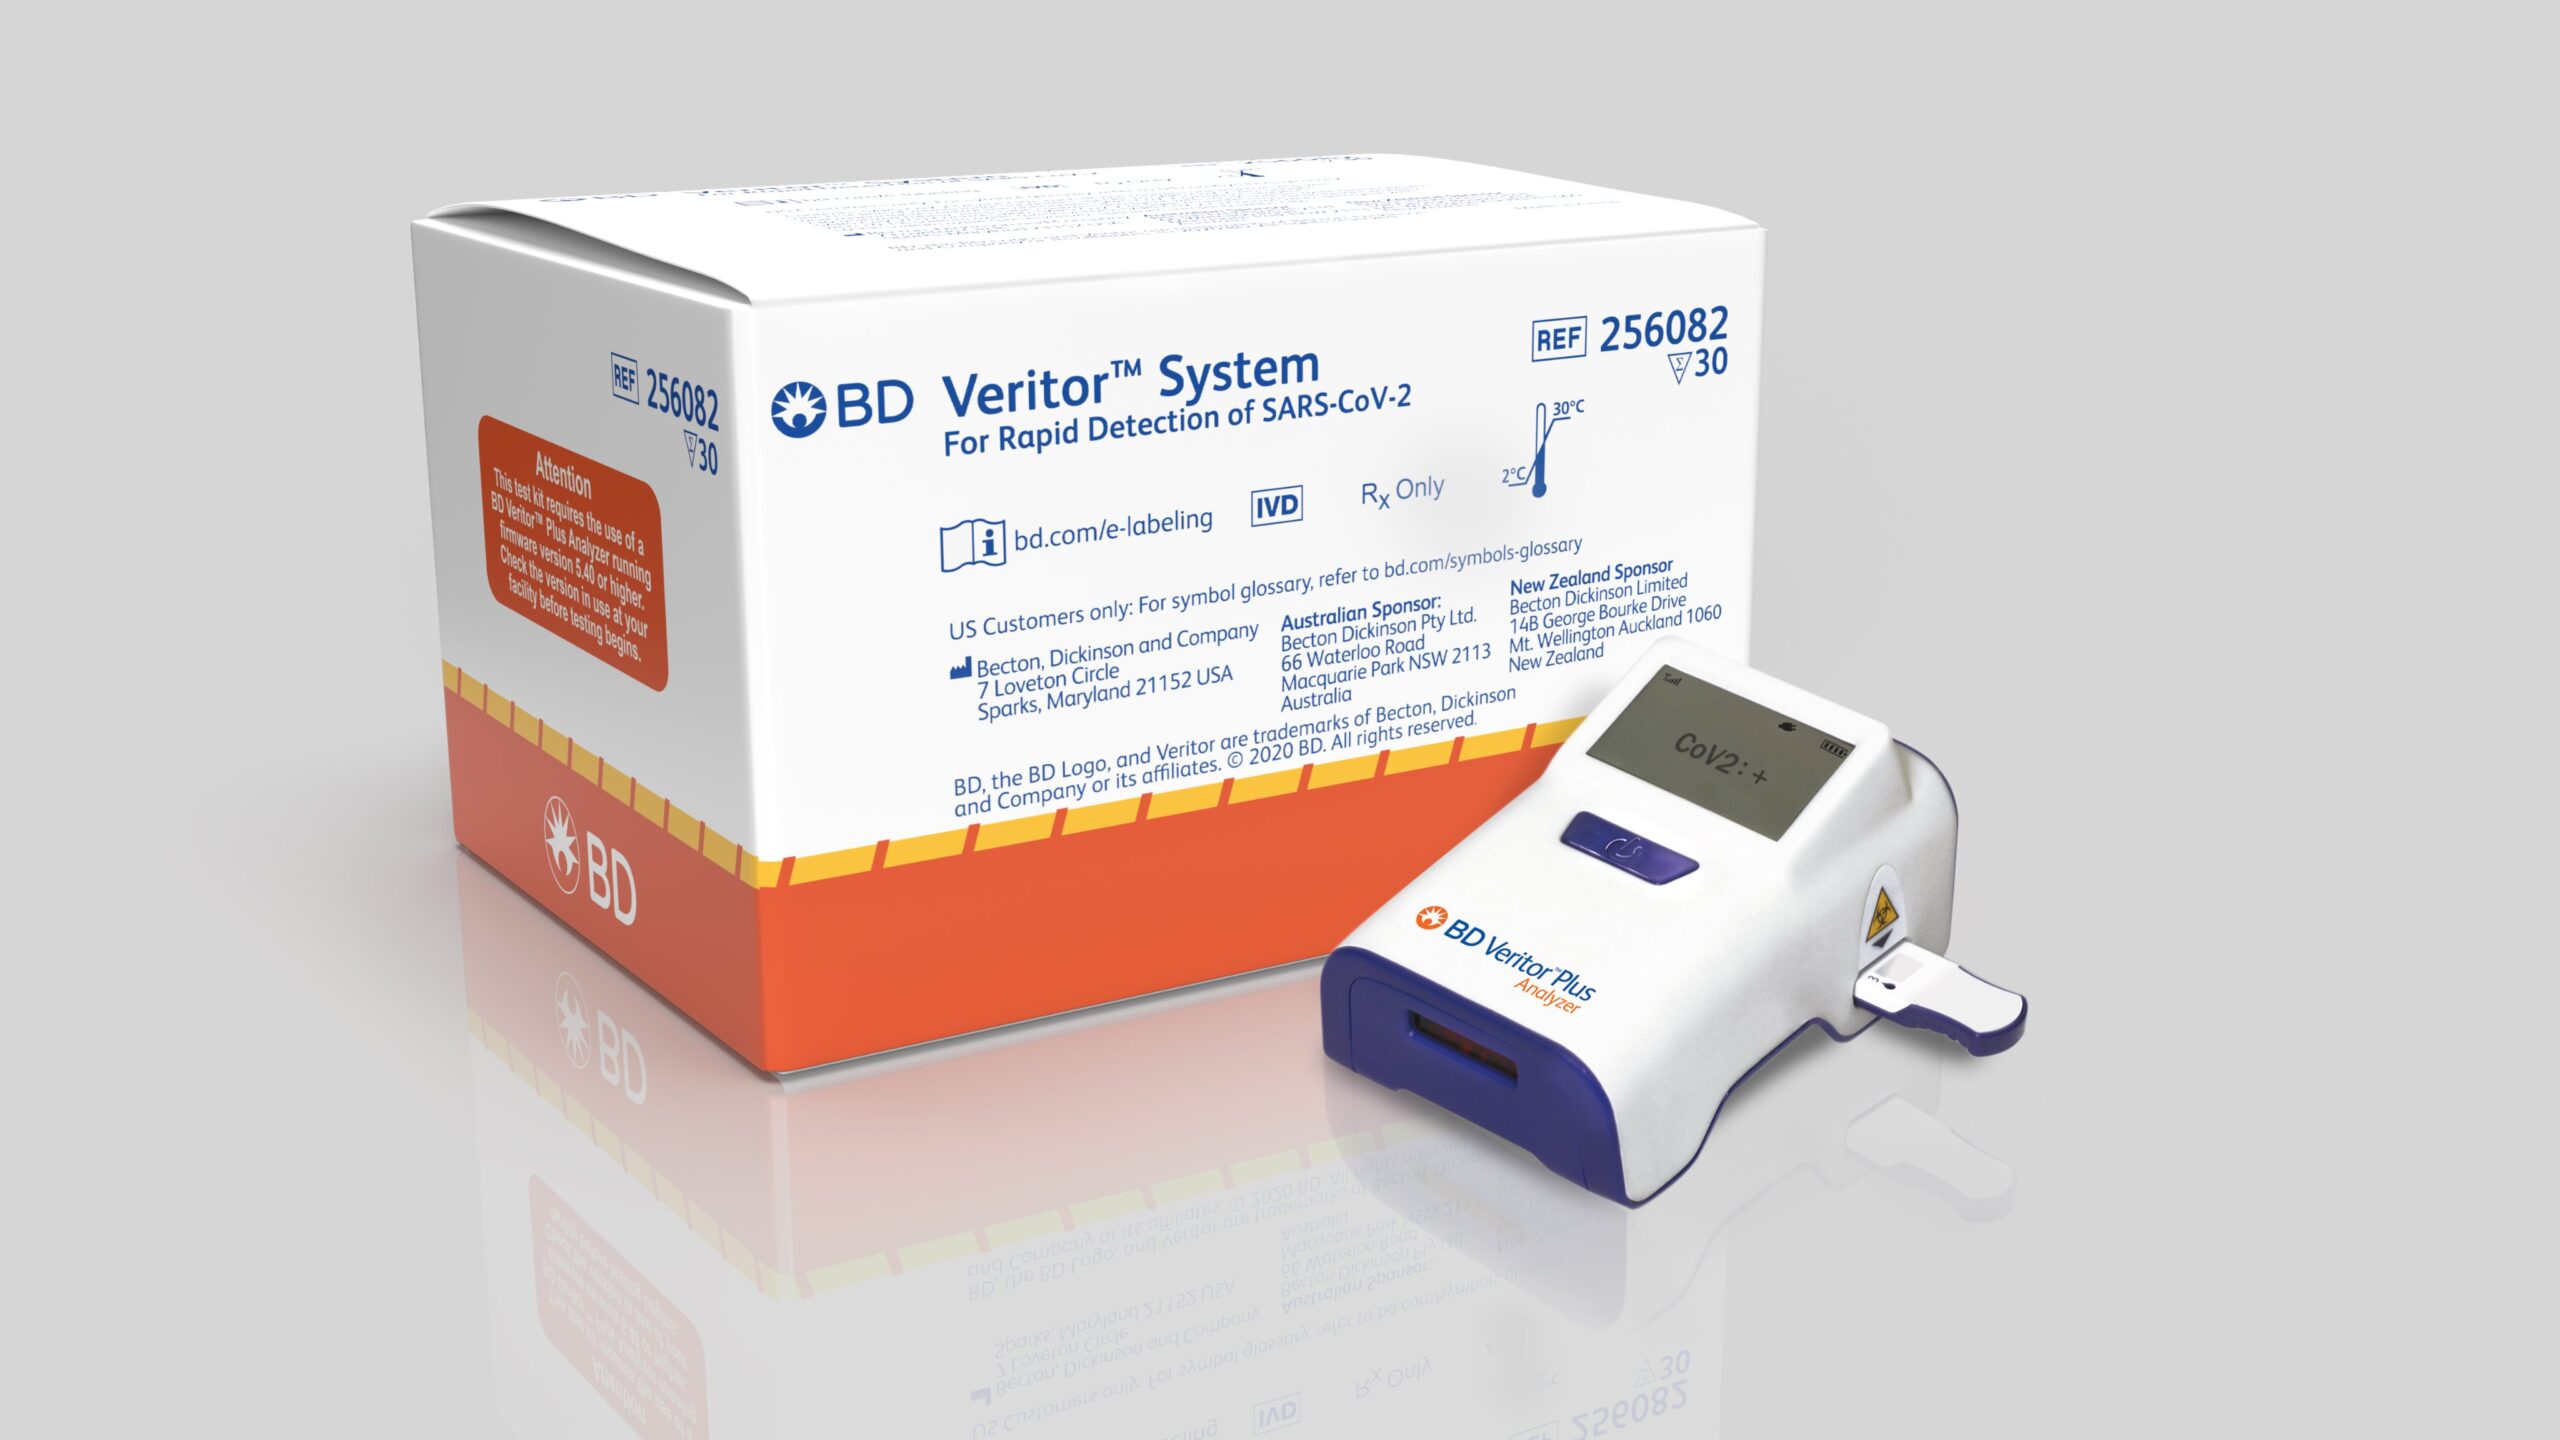 Rapid Antigen Test For COVID-19 Authorized By FDA